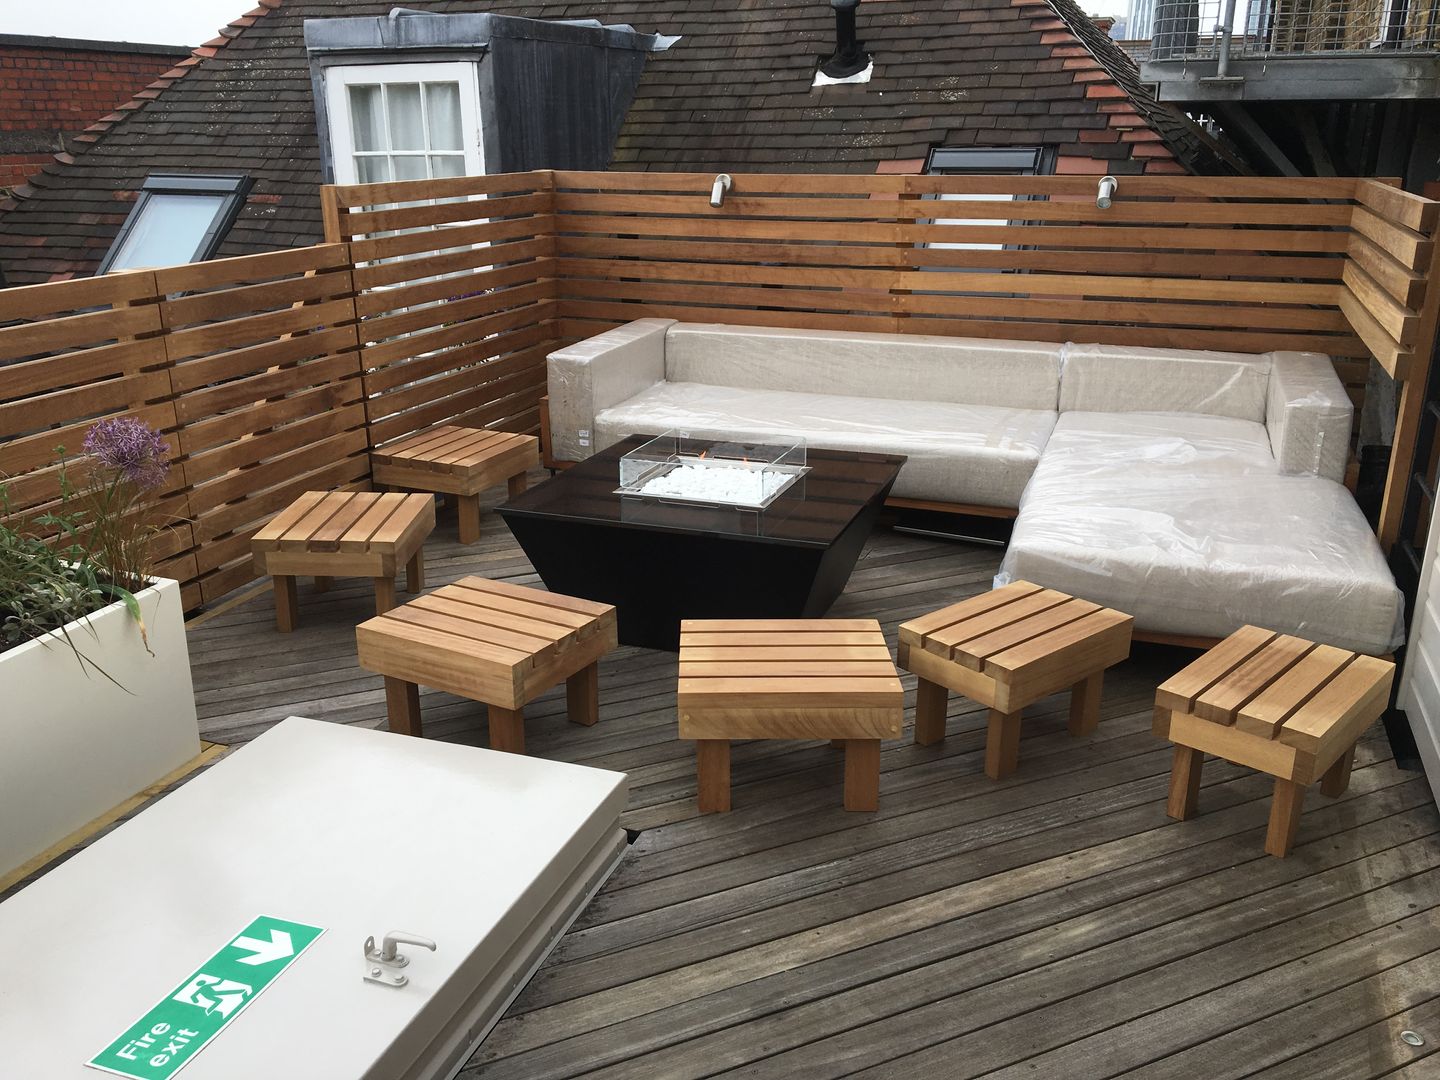 Aztec Gas Fire Table - Rooftop Garden (London) Rivelin Garden Fire pits & barbecues